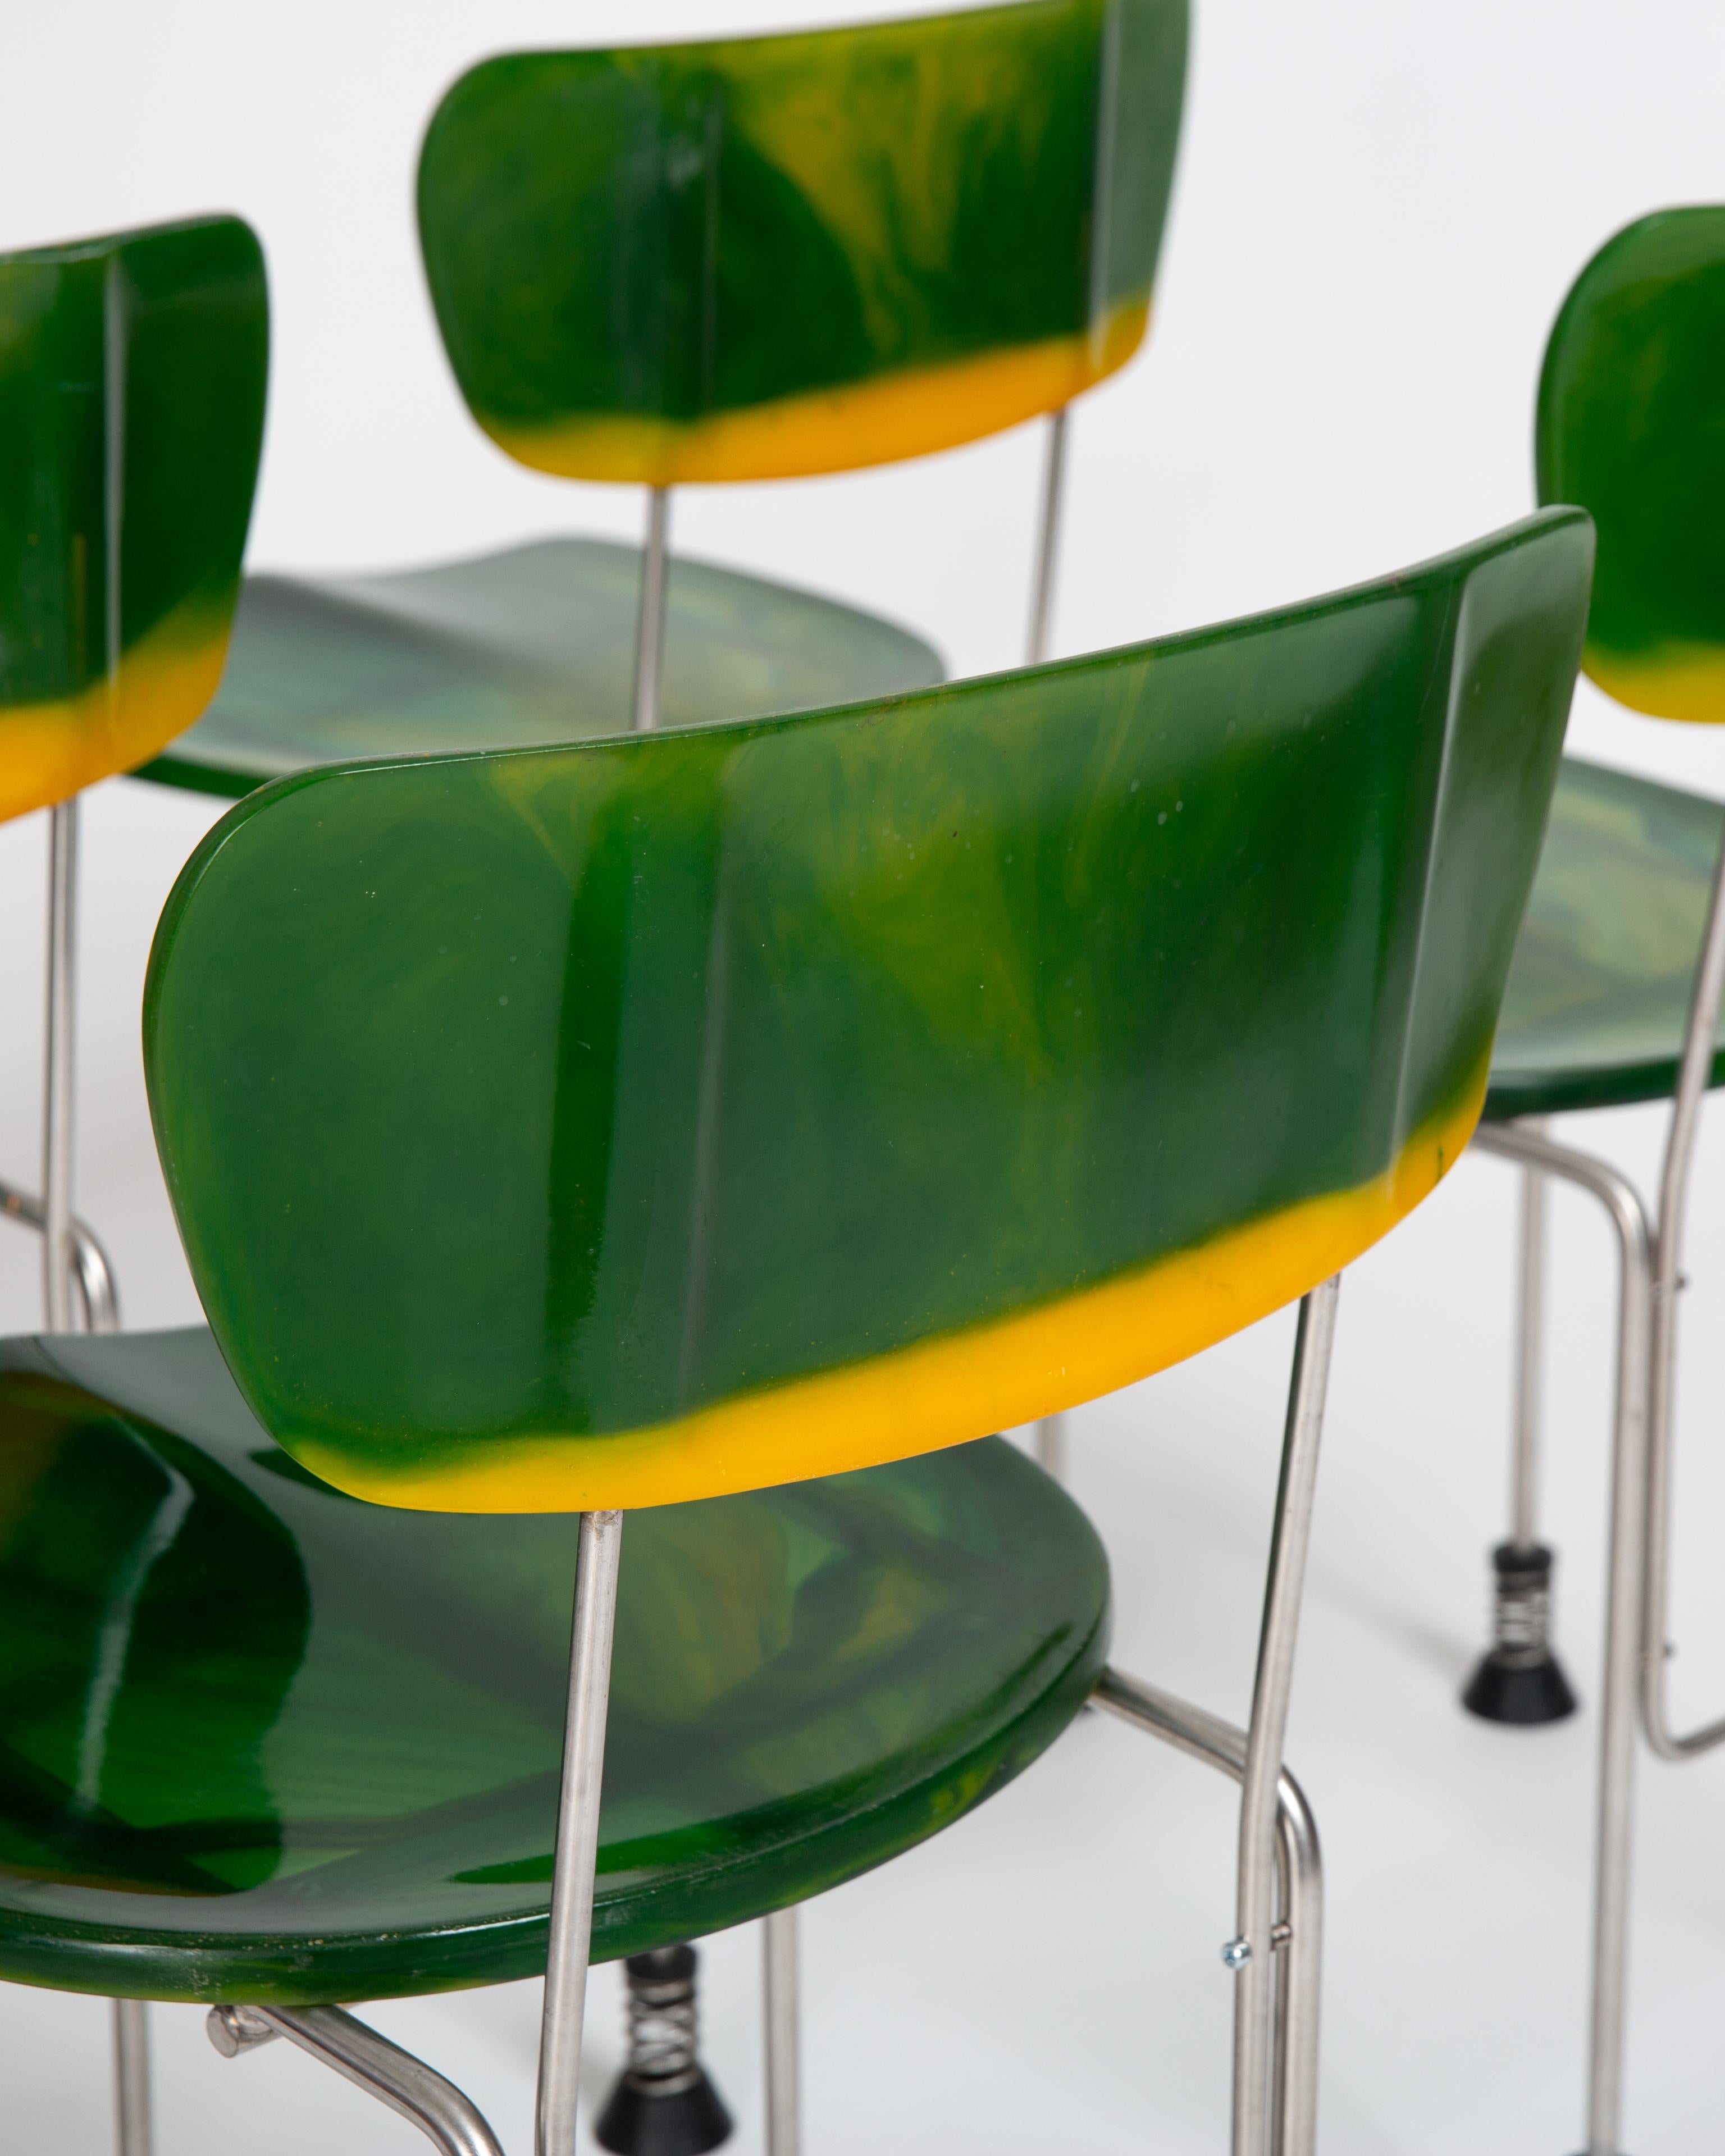 Hand-Crafted Gaetano Pesce Broadway Chairs 543 Made in Italy by Bernini 1993 Green For Sale